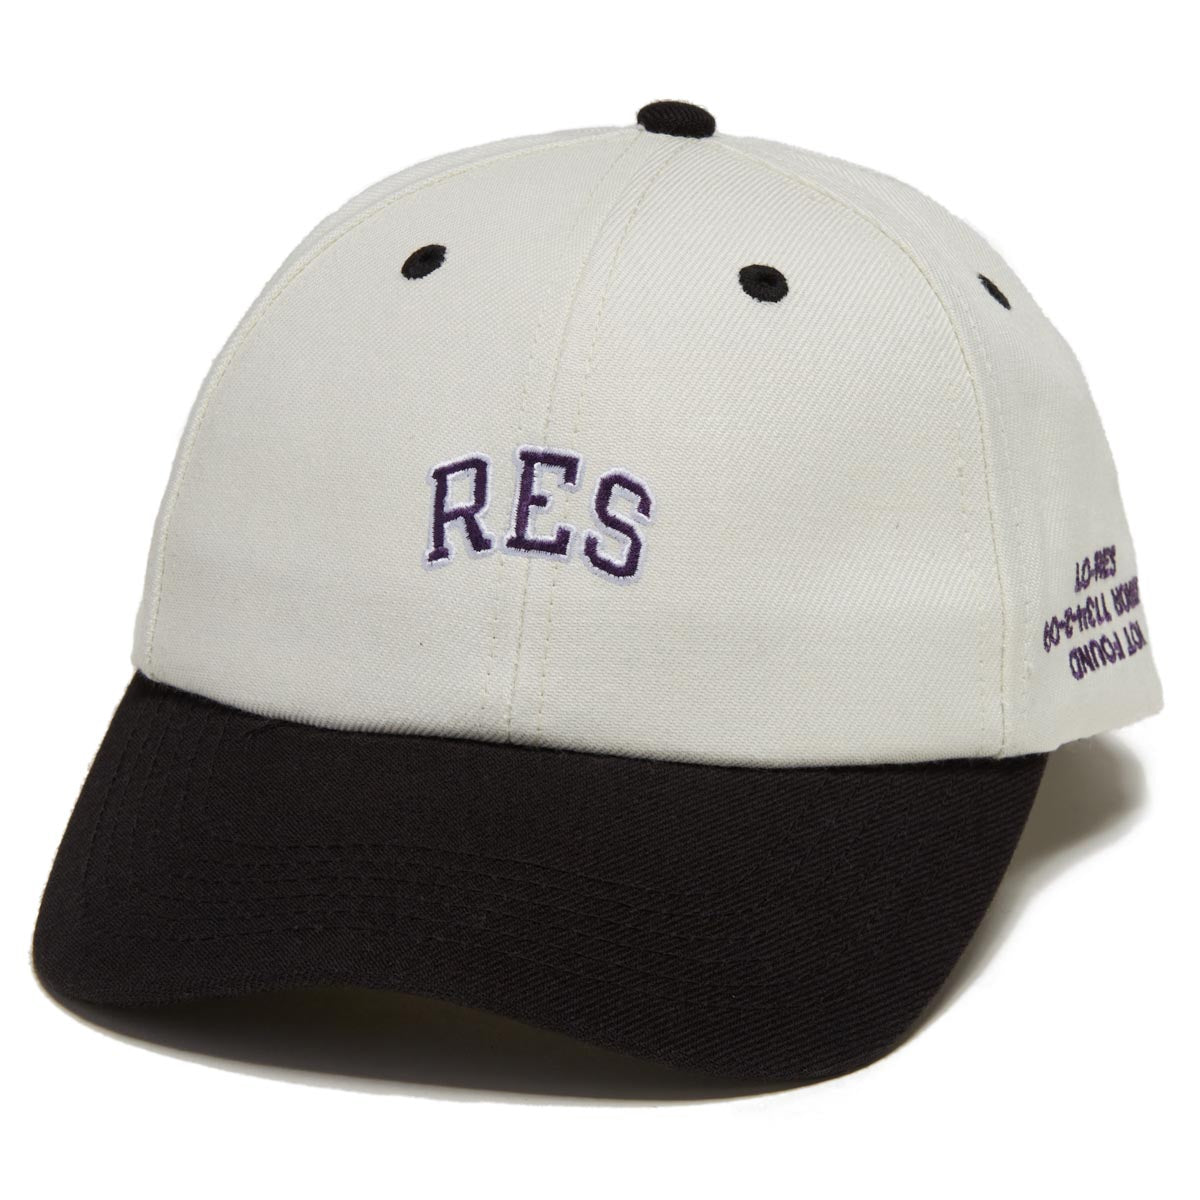 LO-RES Ball Cap Hat - Off-White image 1